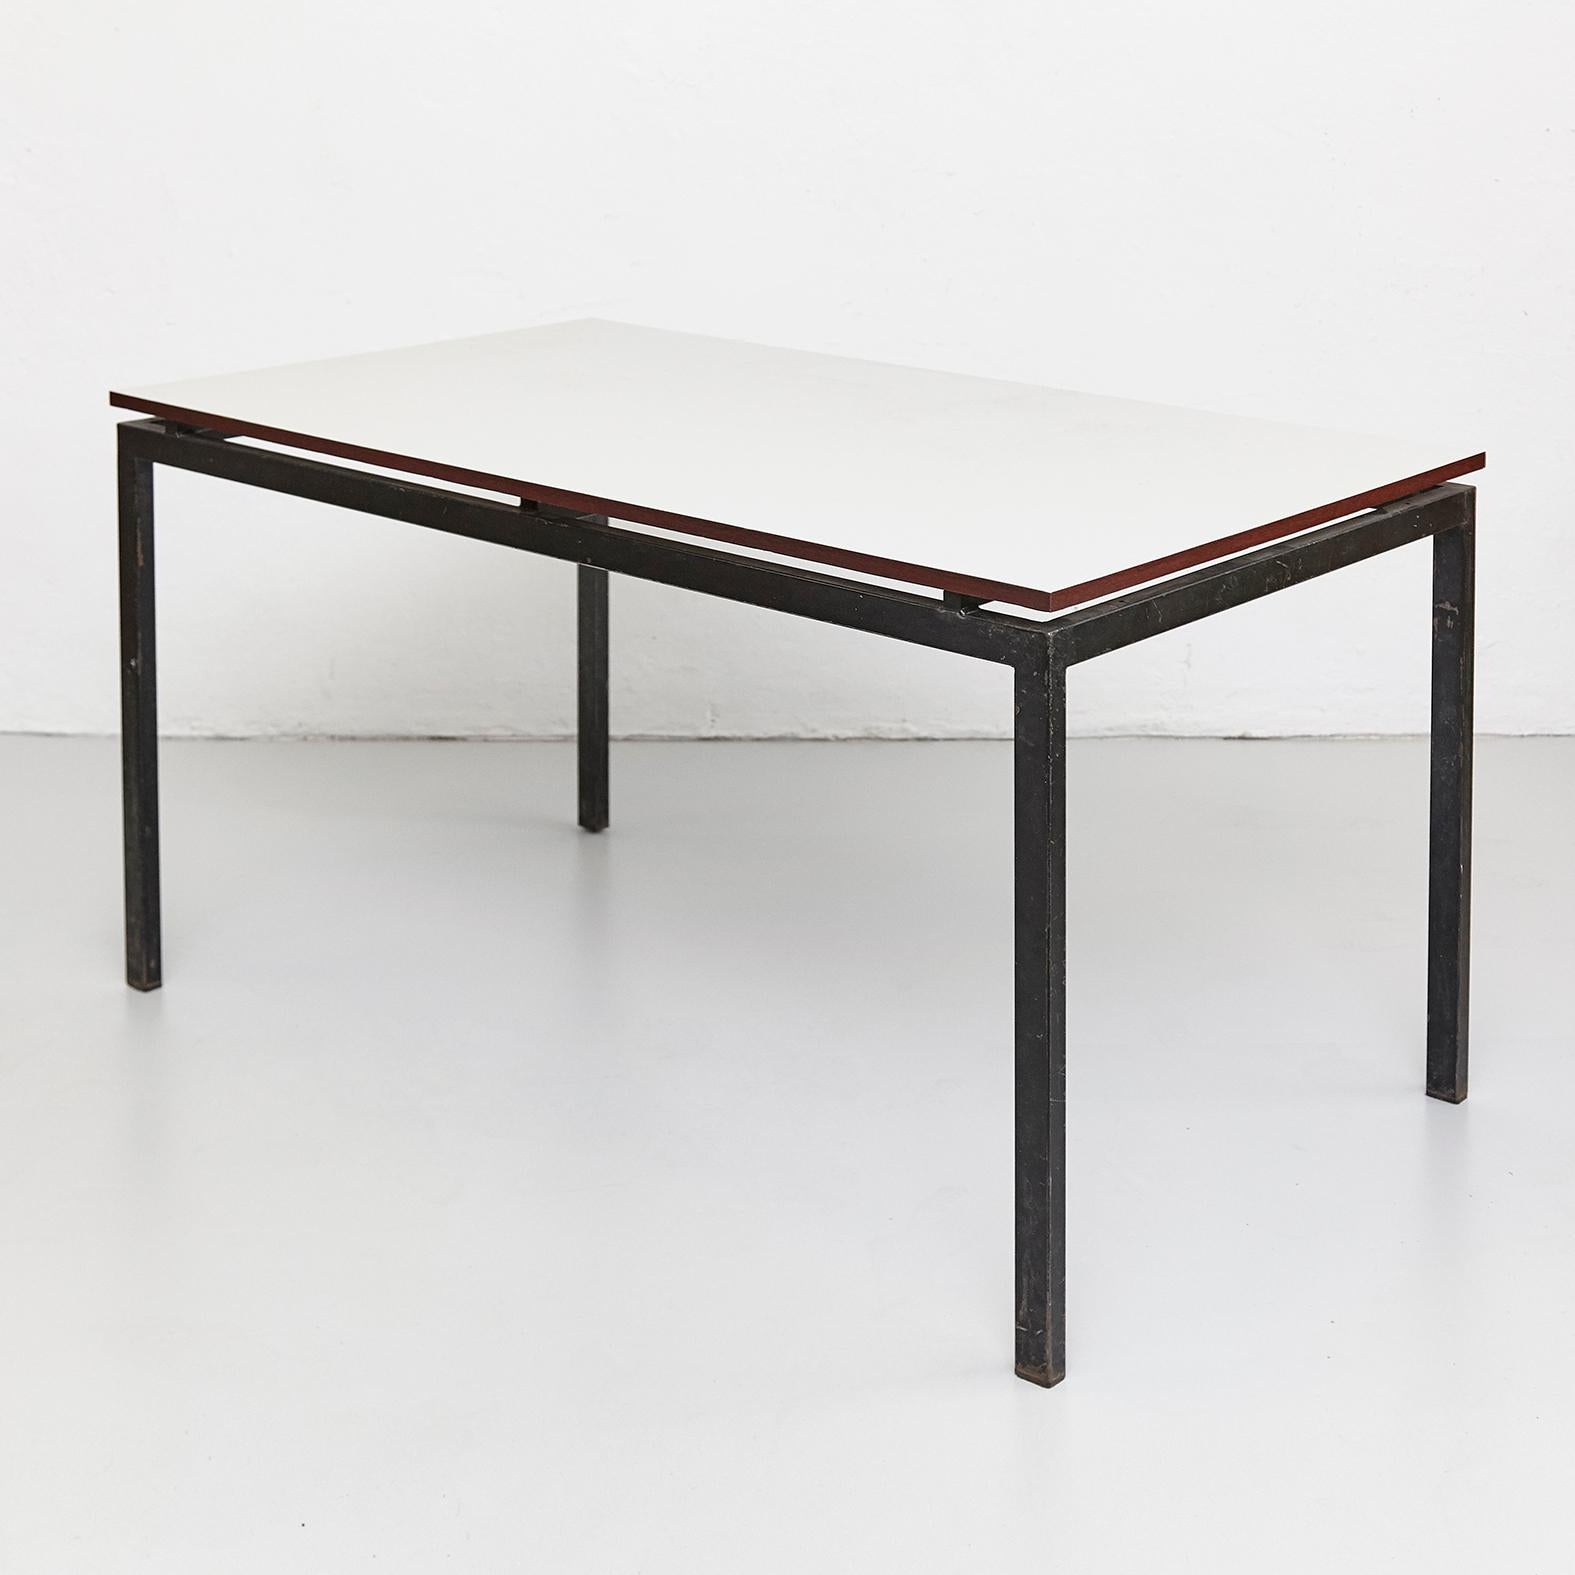 French Charlotte Perriand Mid-Century Modern Black and Grey Cansado Table, circa 1950